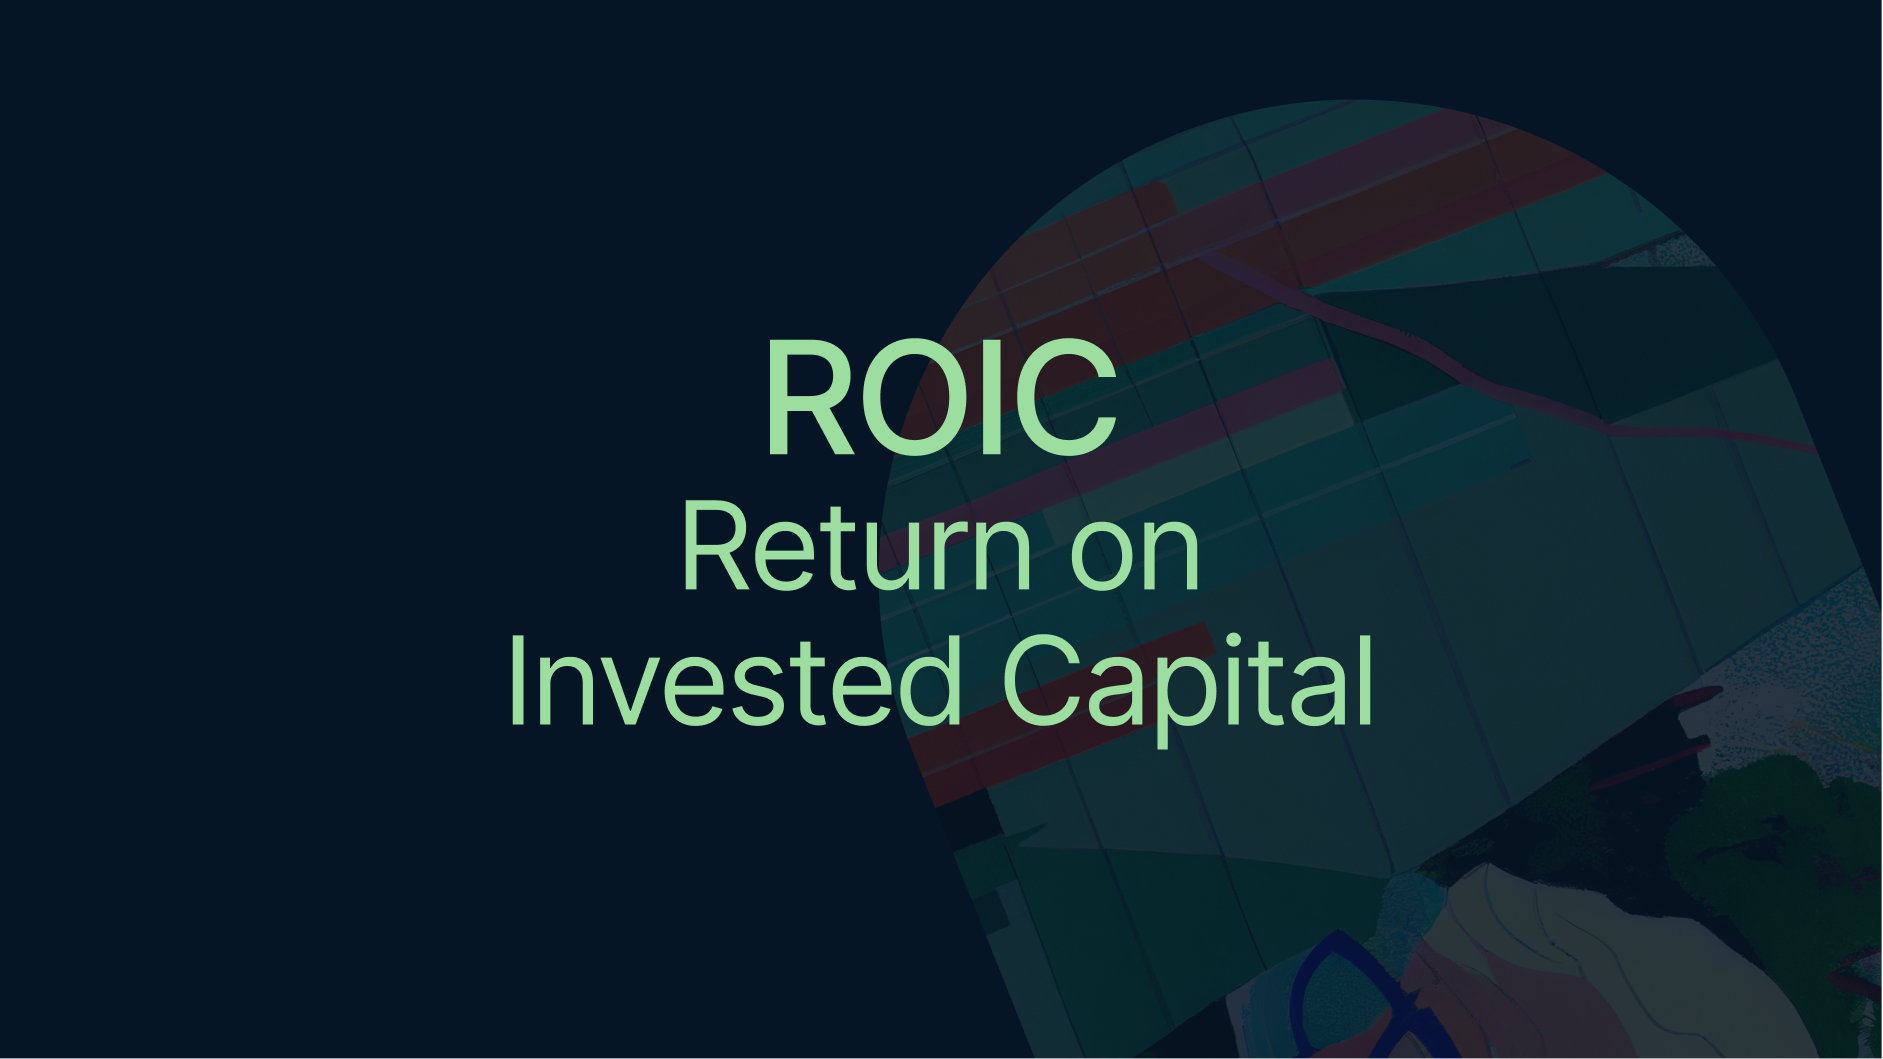 Return on Invested Capital - ROIC